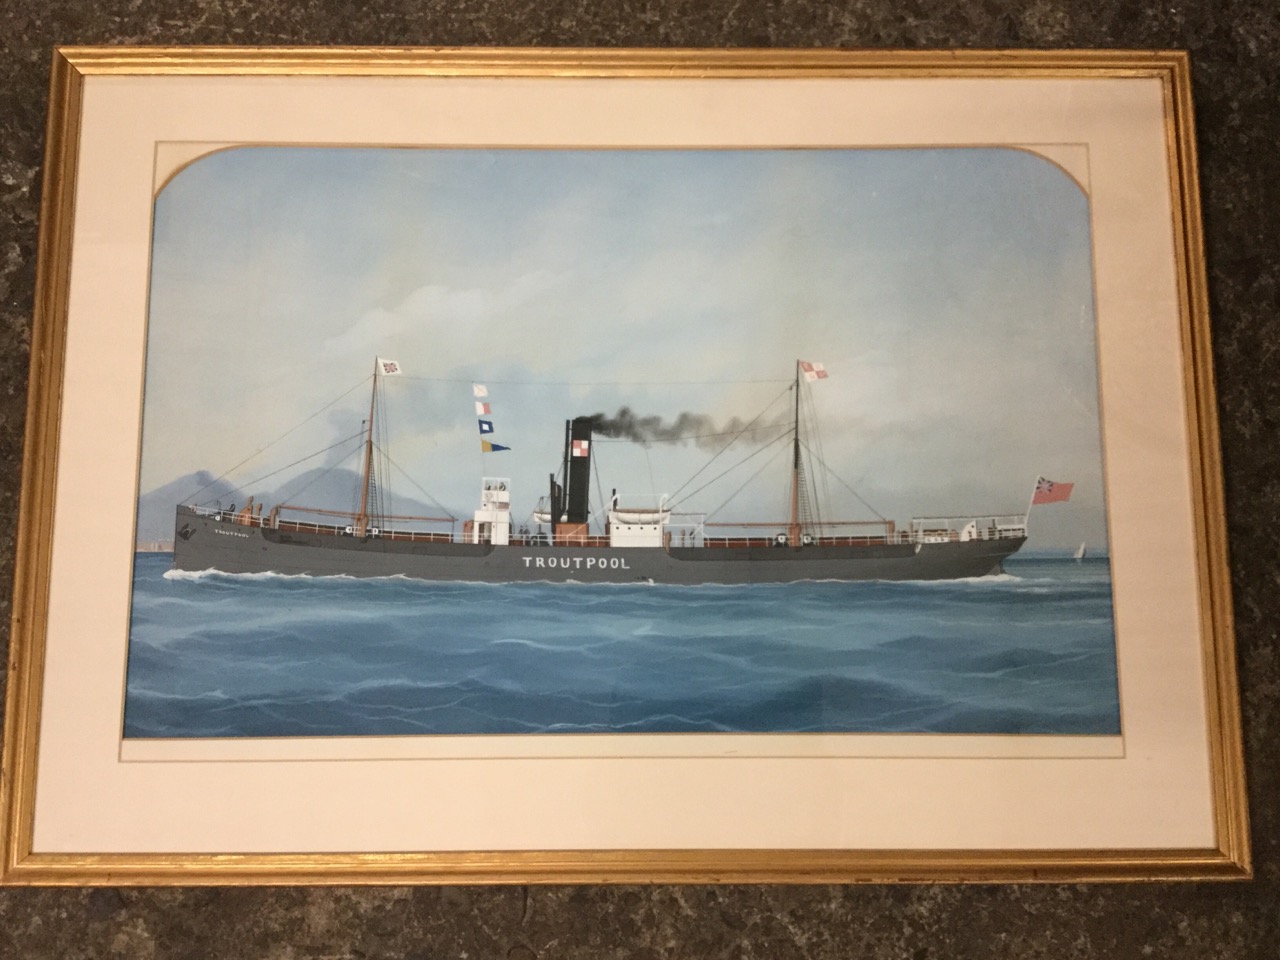 Watercolour & gouache, a study of Troutpool cargo ship under full steam, with figures on deck and